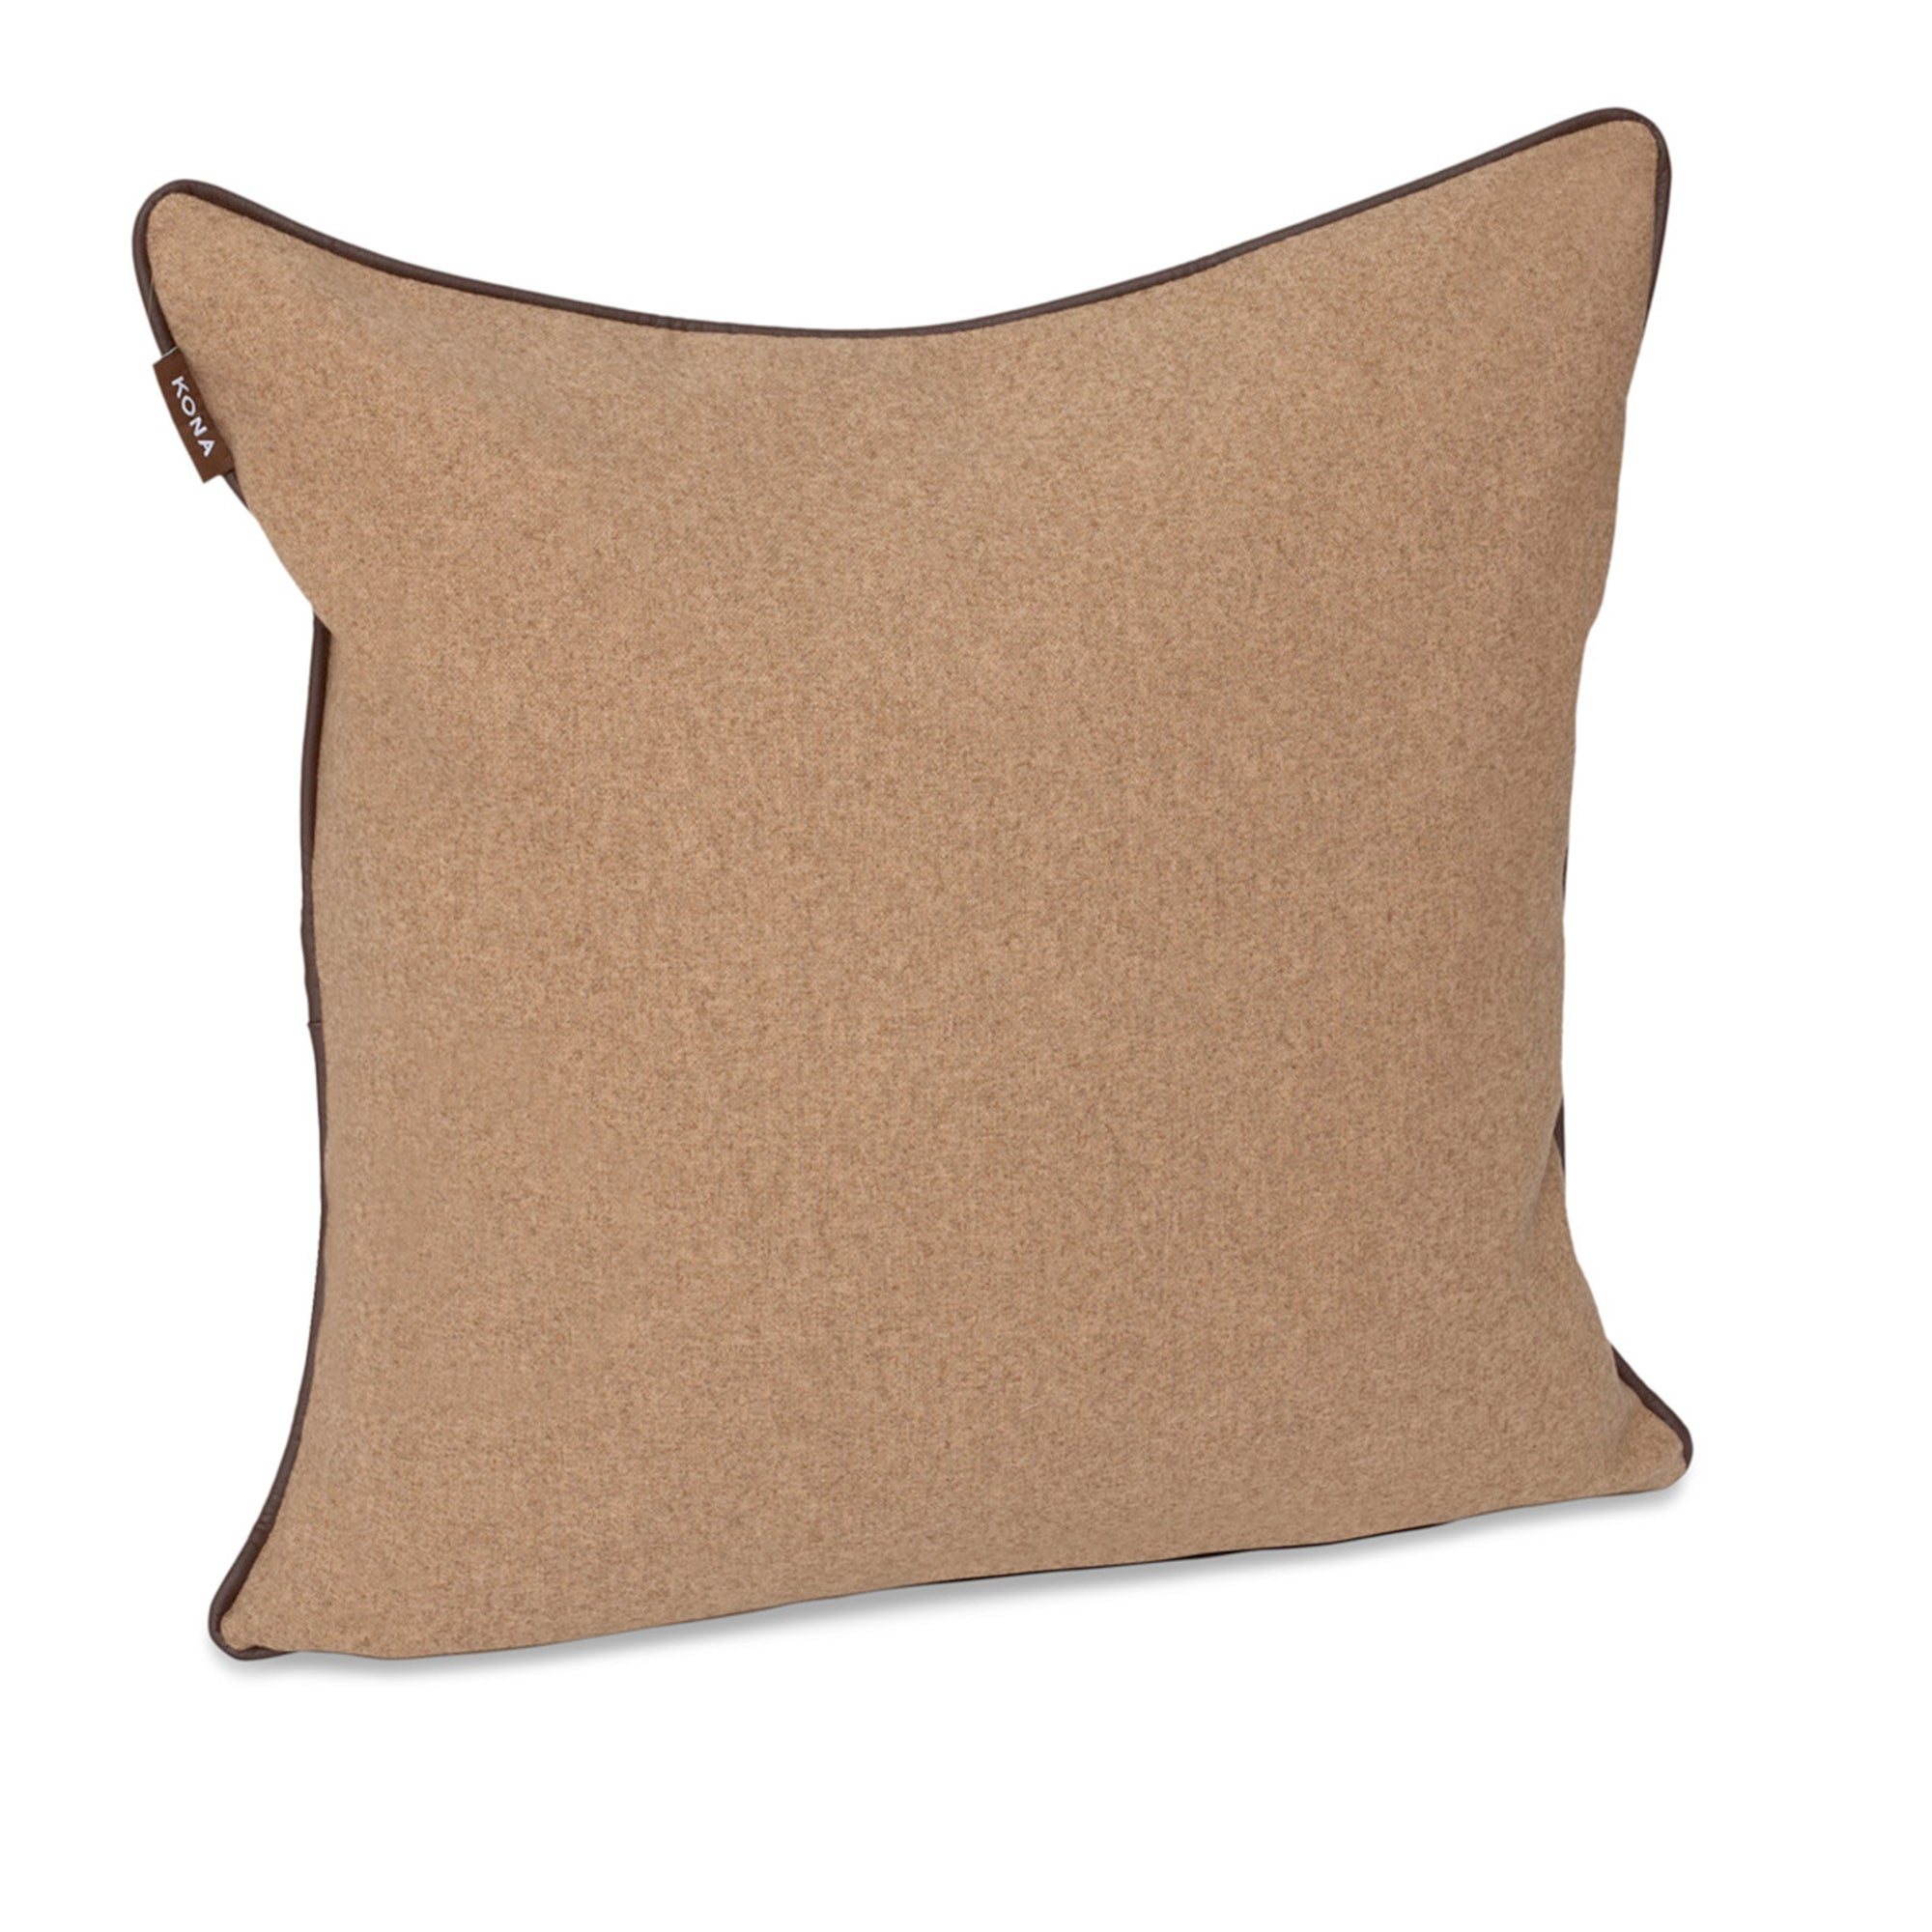 KONA CAVE® Decorative pillow covers, elegant light brown flannel with leather trim.